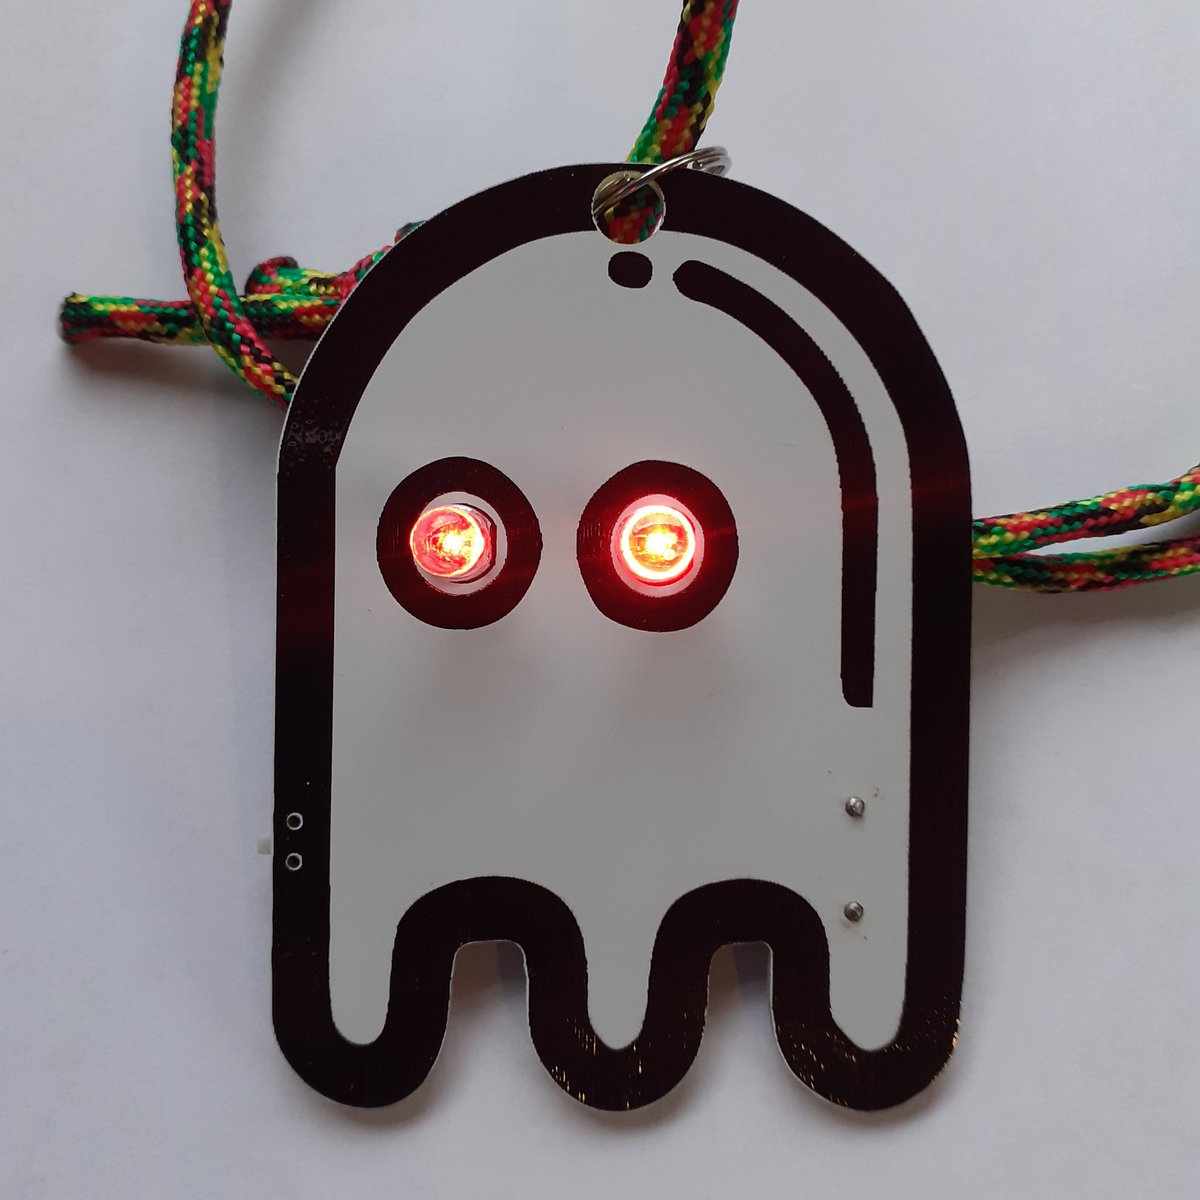 Annoy-A-Tron from Suicidebattery on Tindie